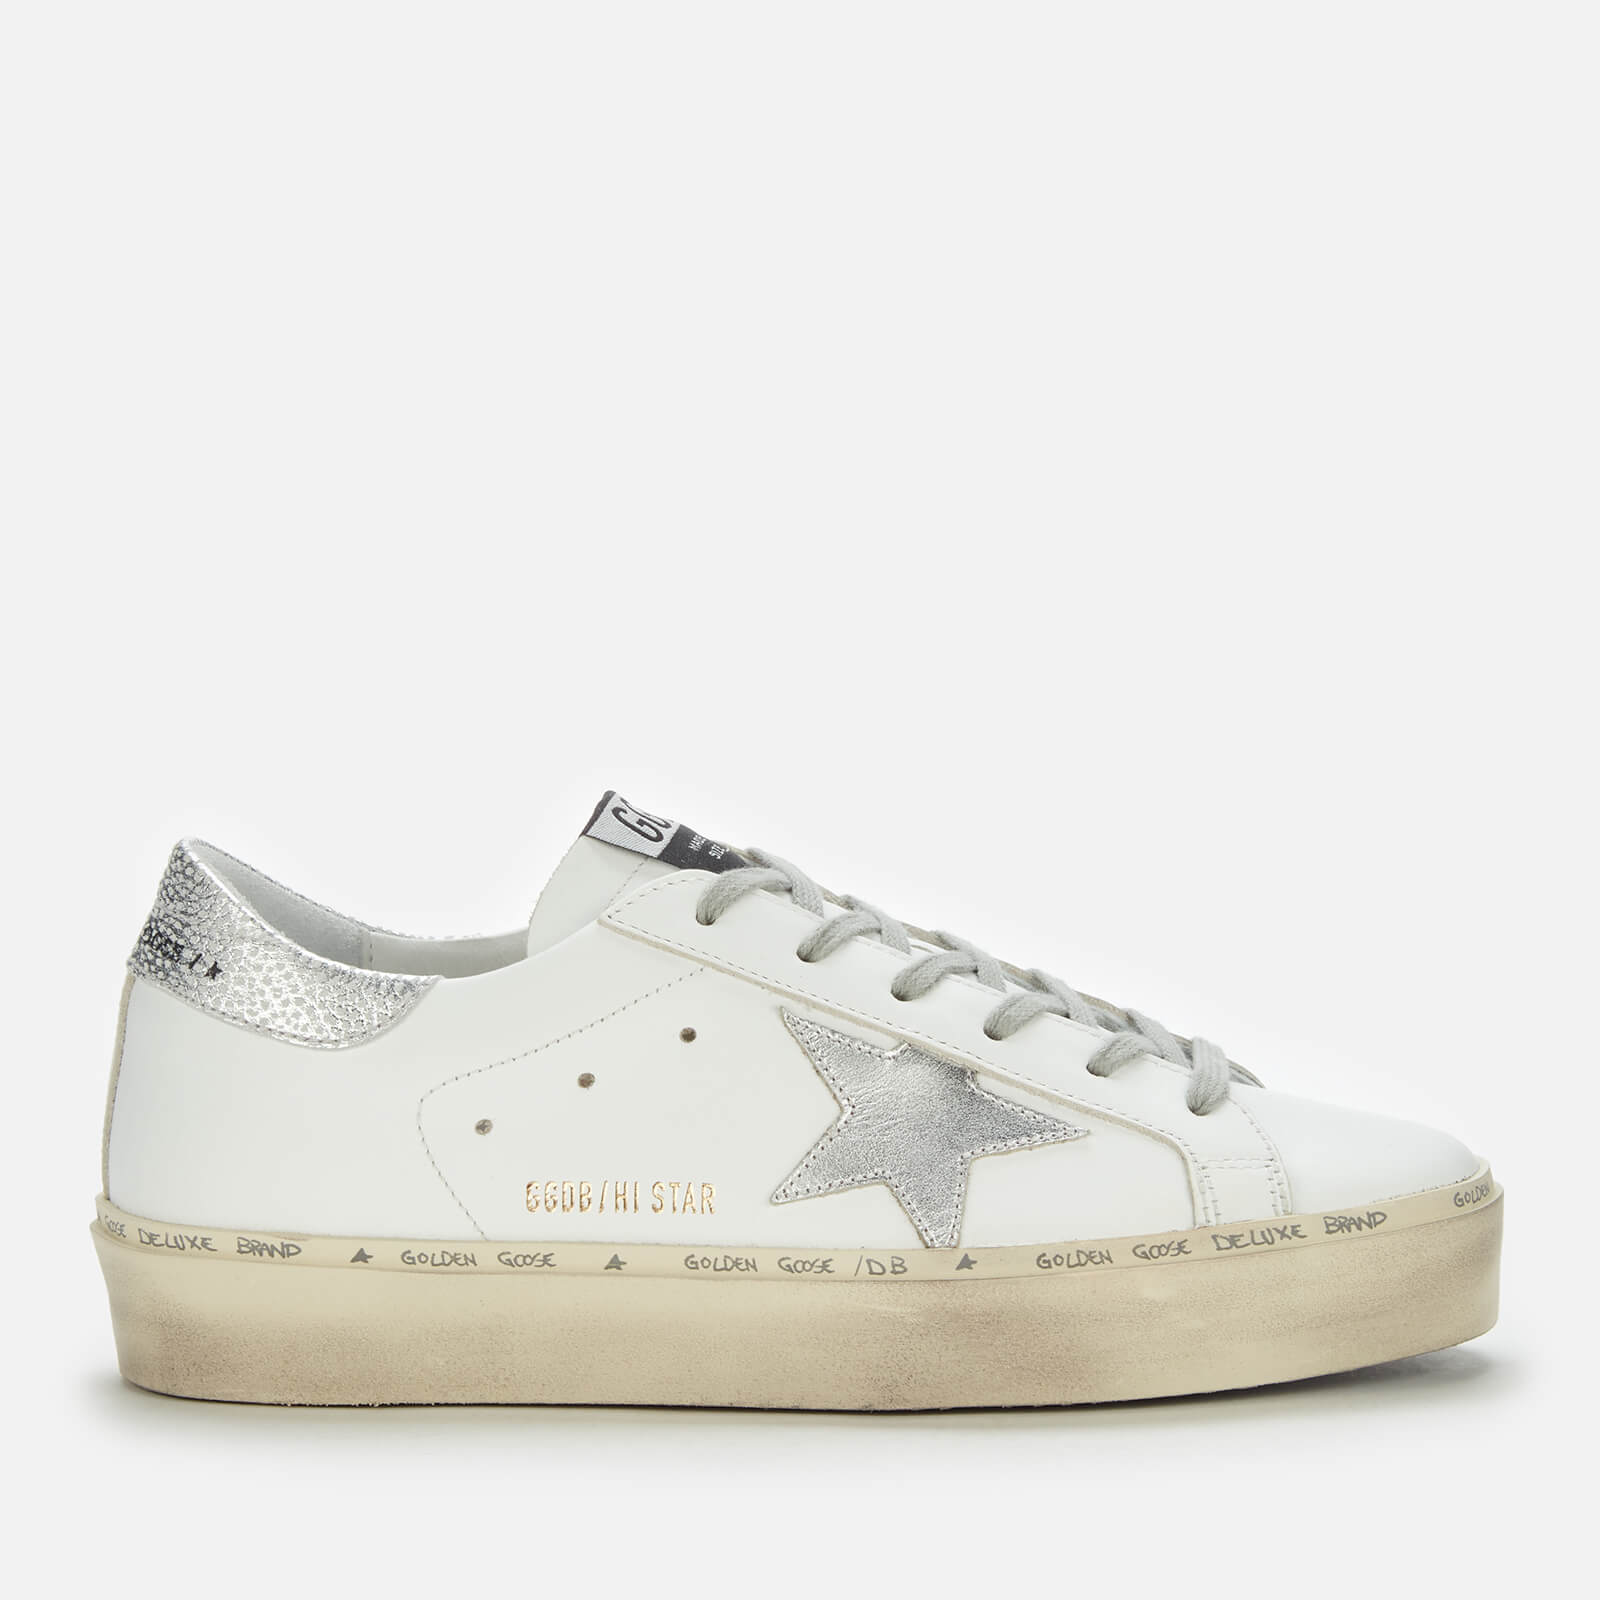 Golden Goose Deluxe Brand Women's Hi-Star Leather Flatform Trainers - White/Silver - UK 8